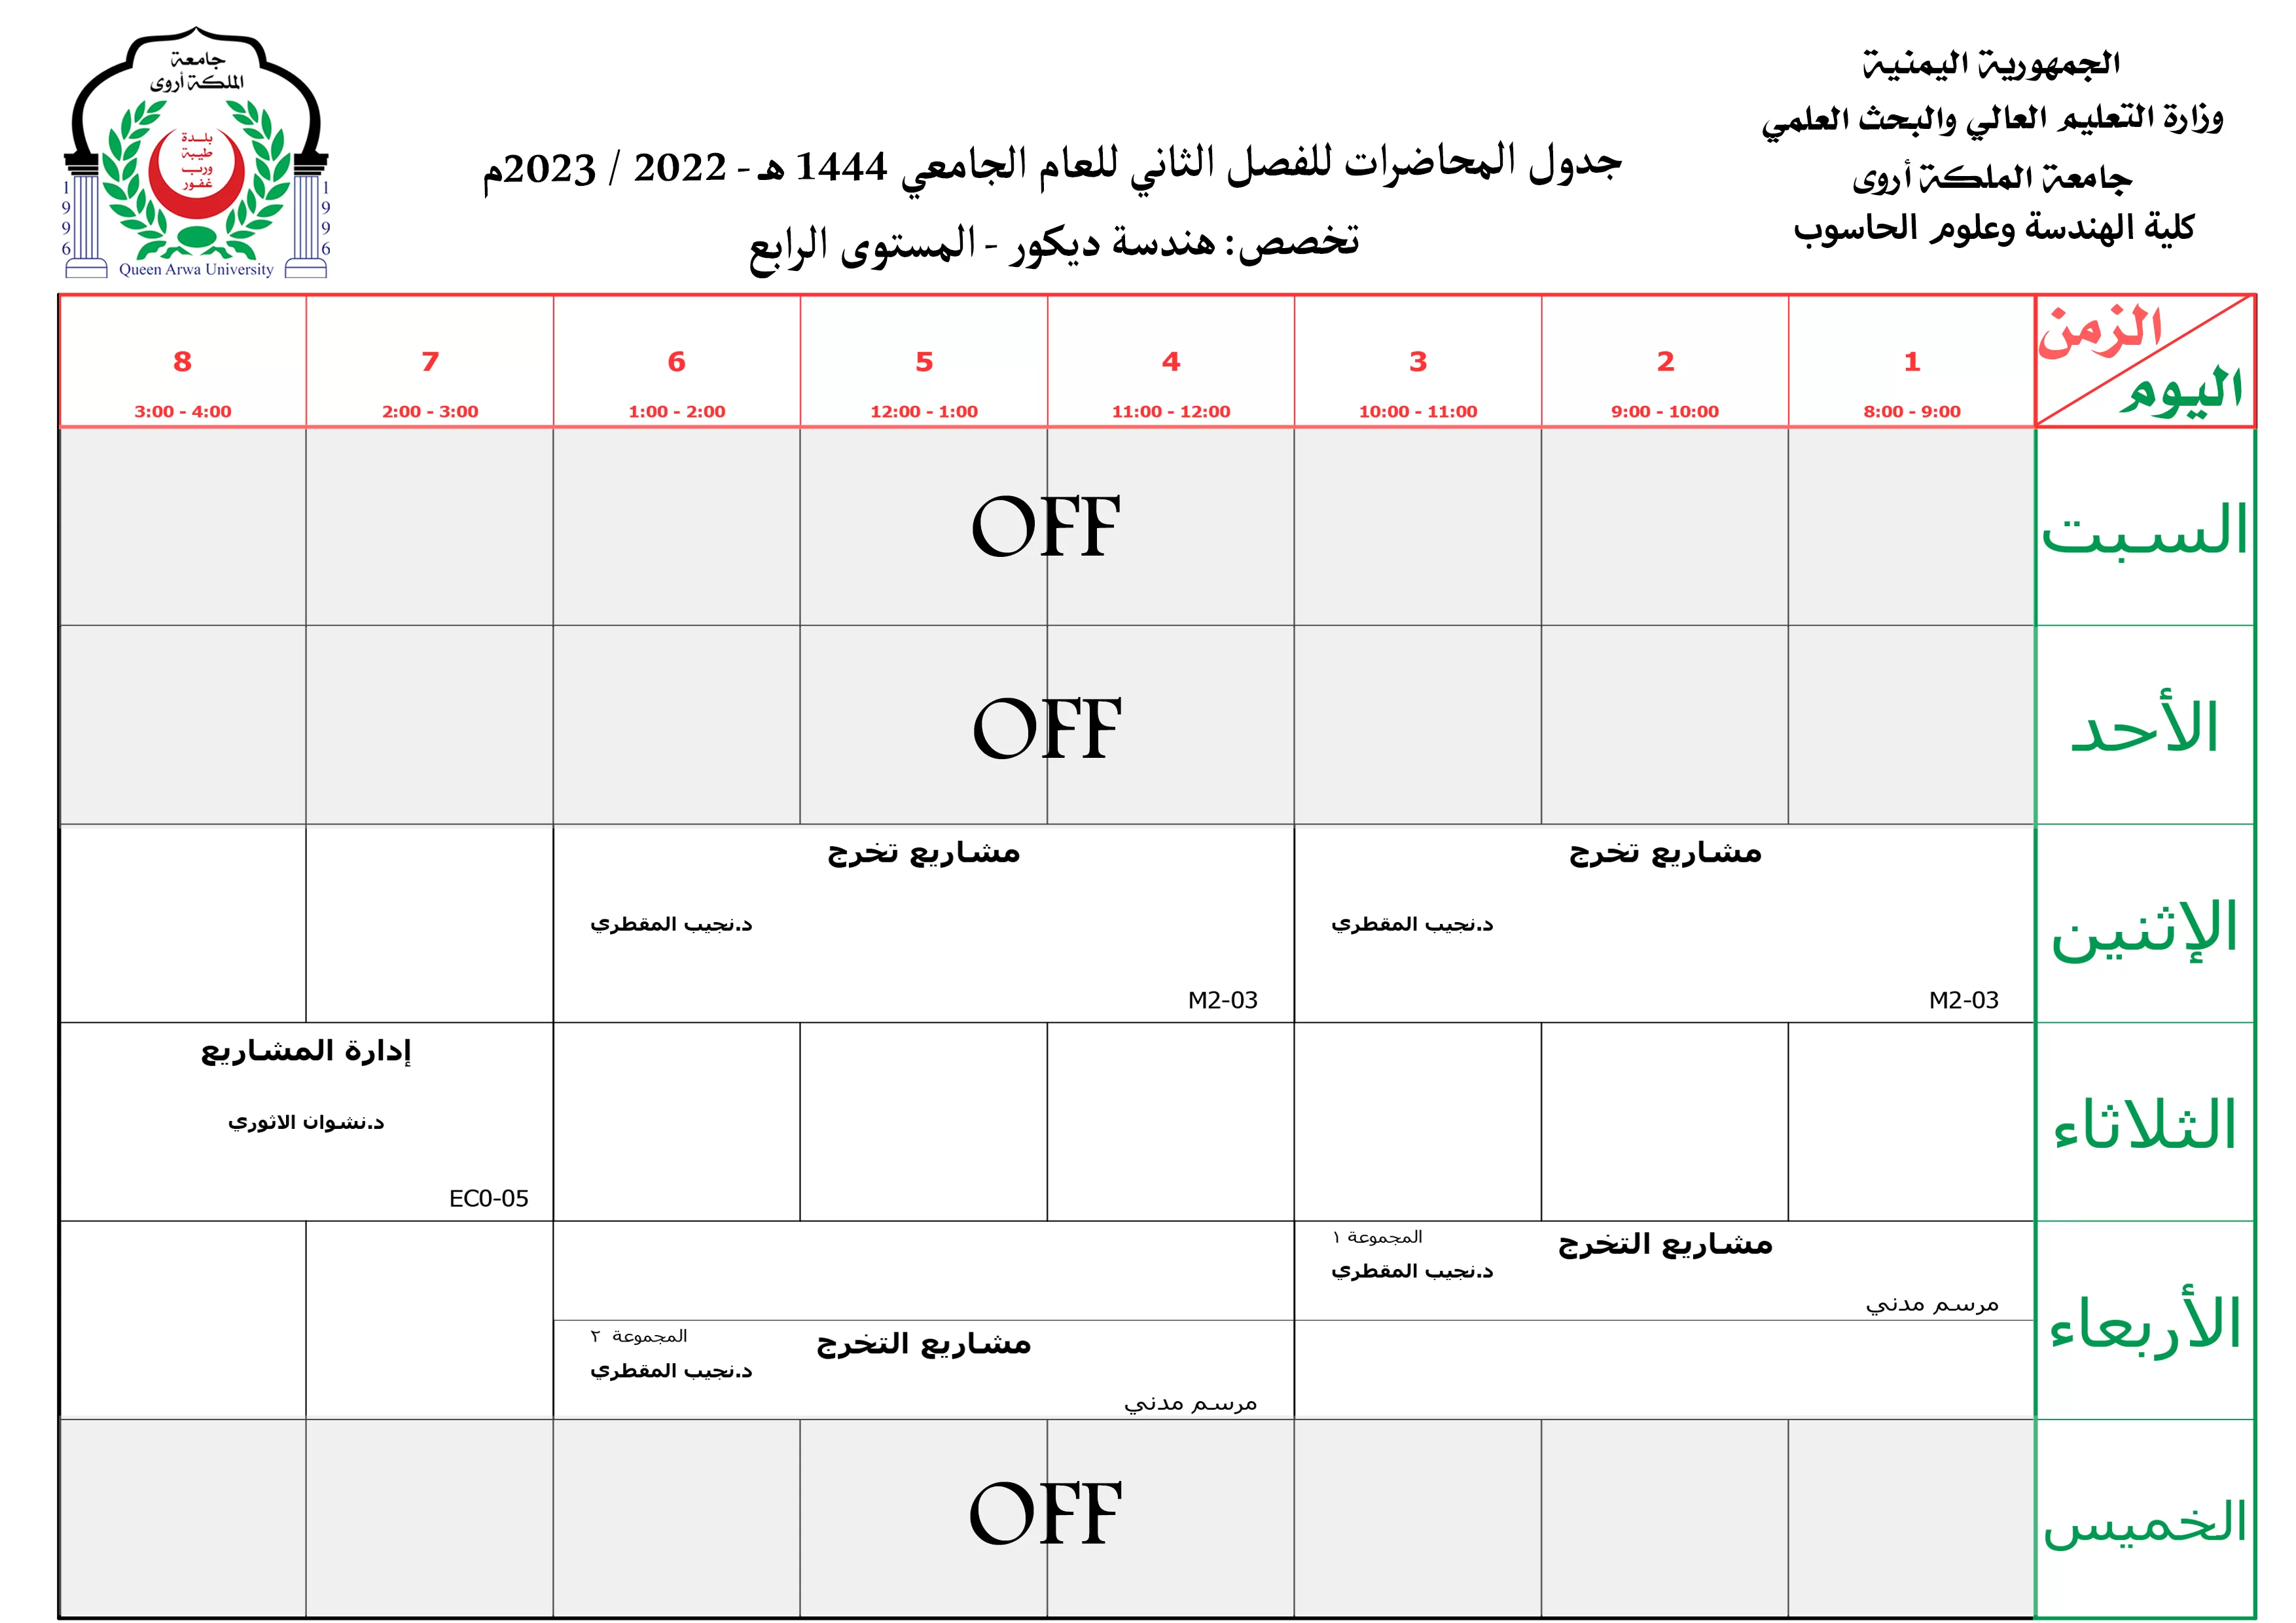 Lecture schedules